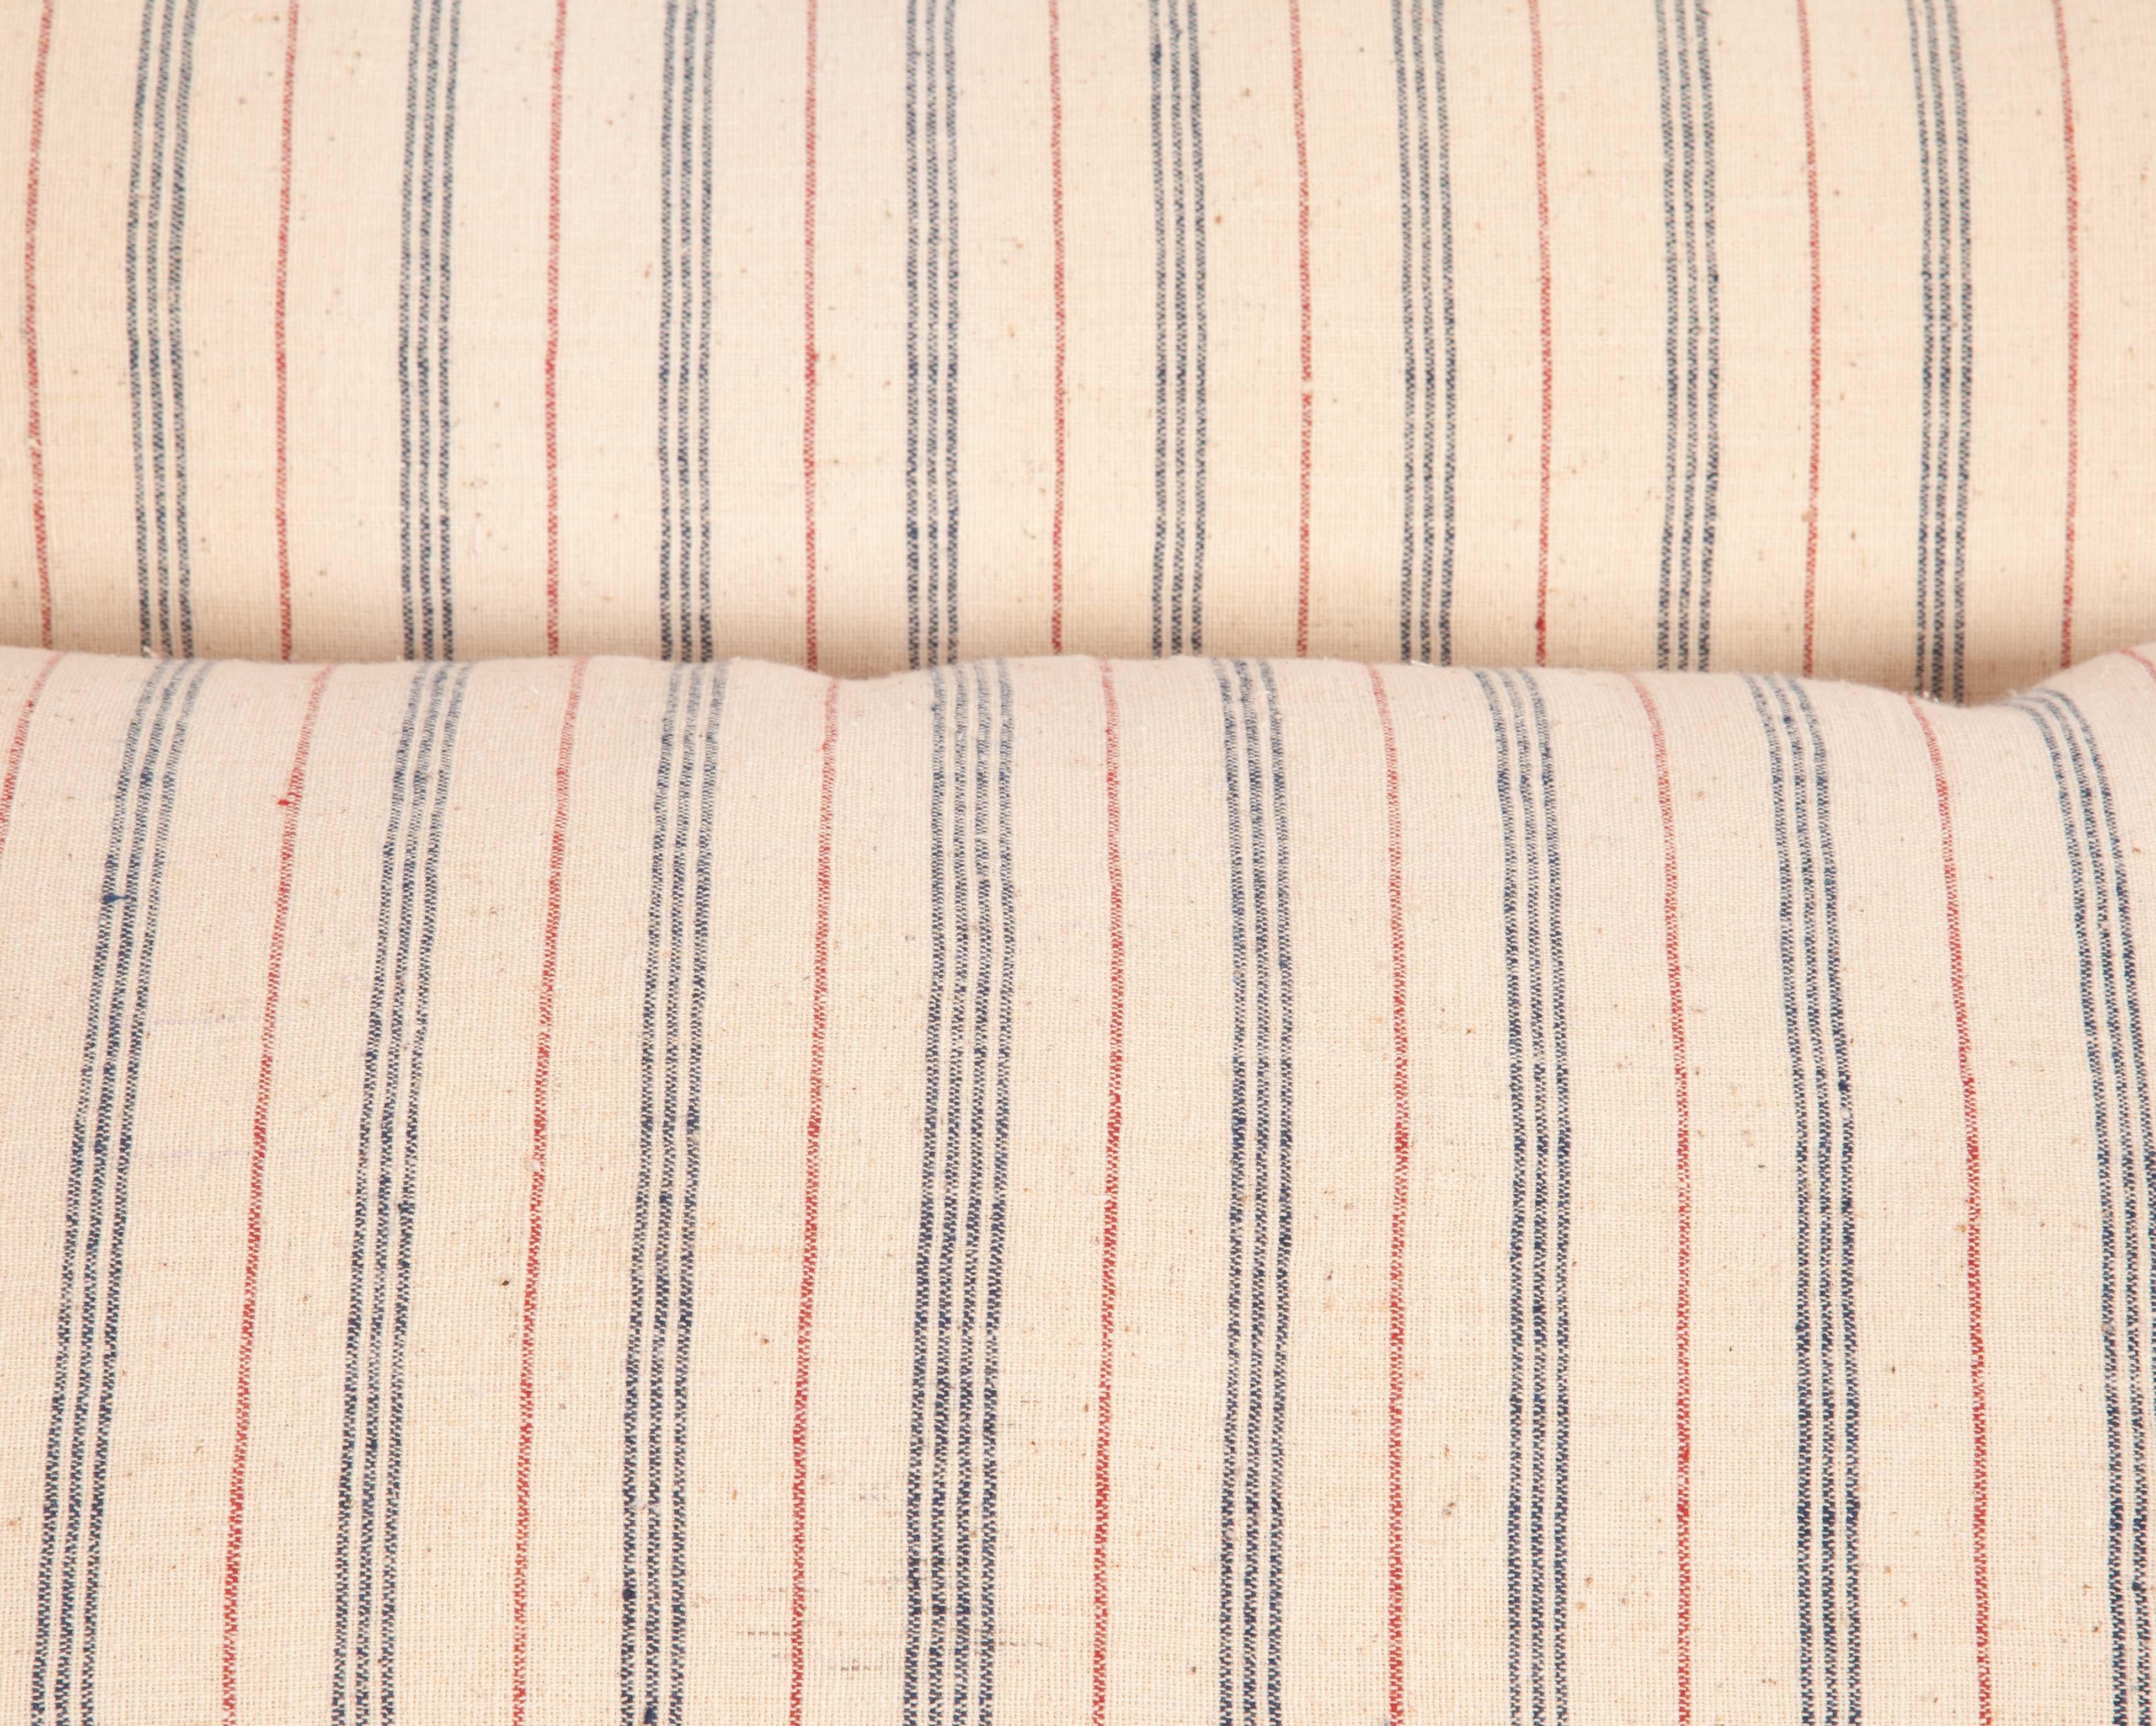 Hand-Woven Linen and Cotton Pillow Cases Made from a Vintage Anatolian Handwoven Textile